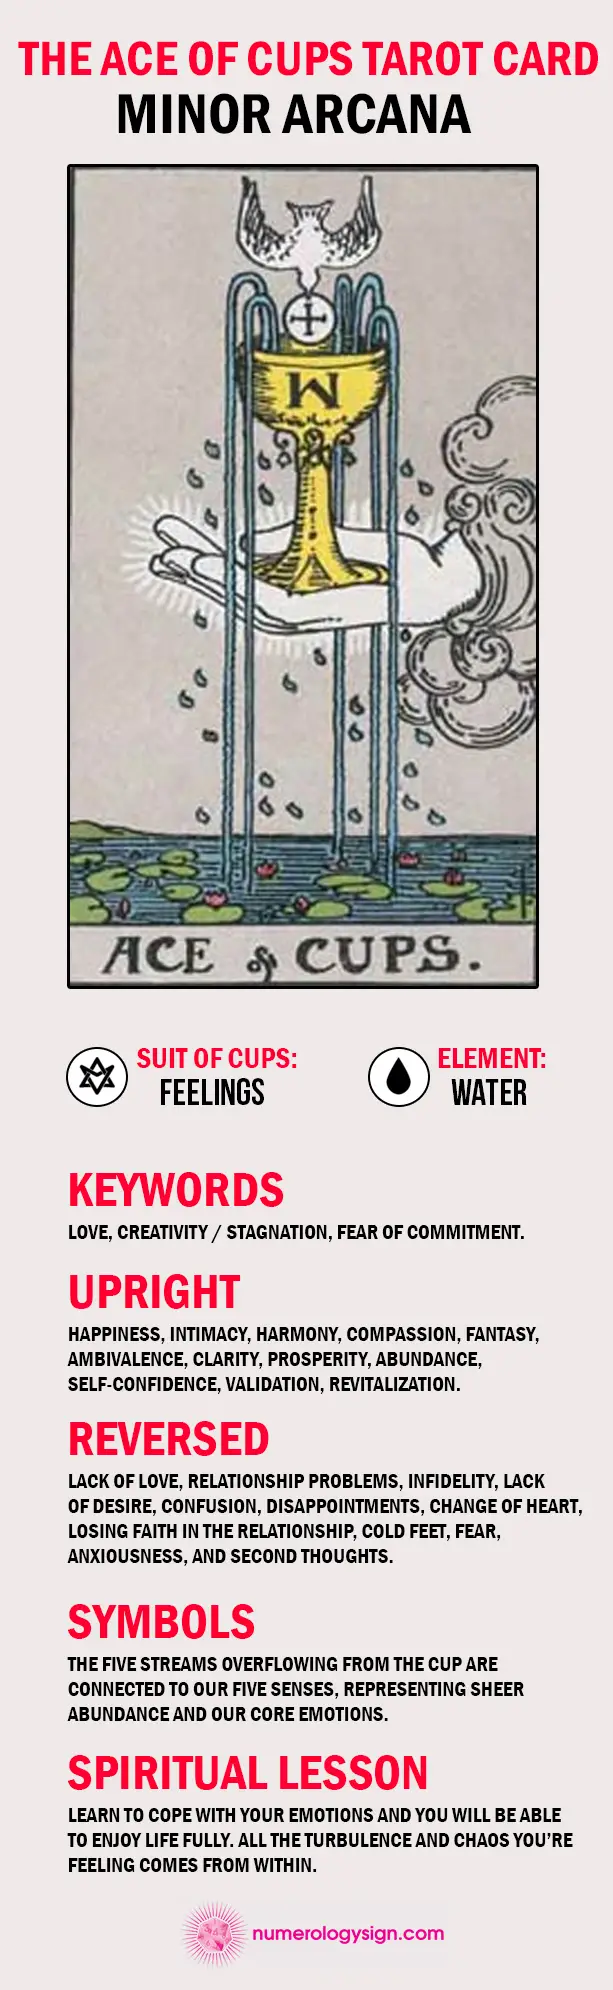 The Ace of Cups Tarot Card Meaning Infographic - Minor Arcana